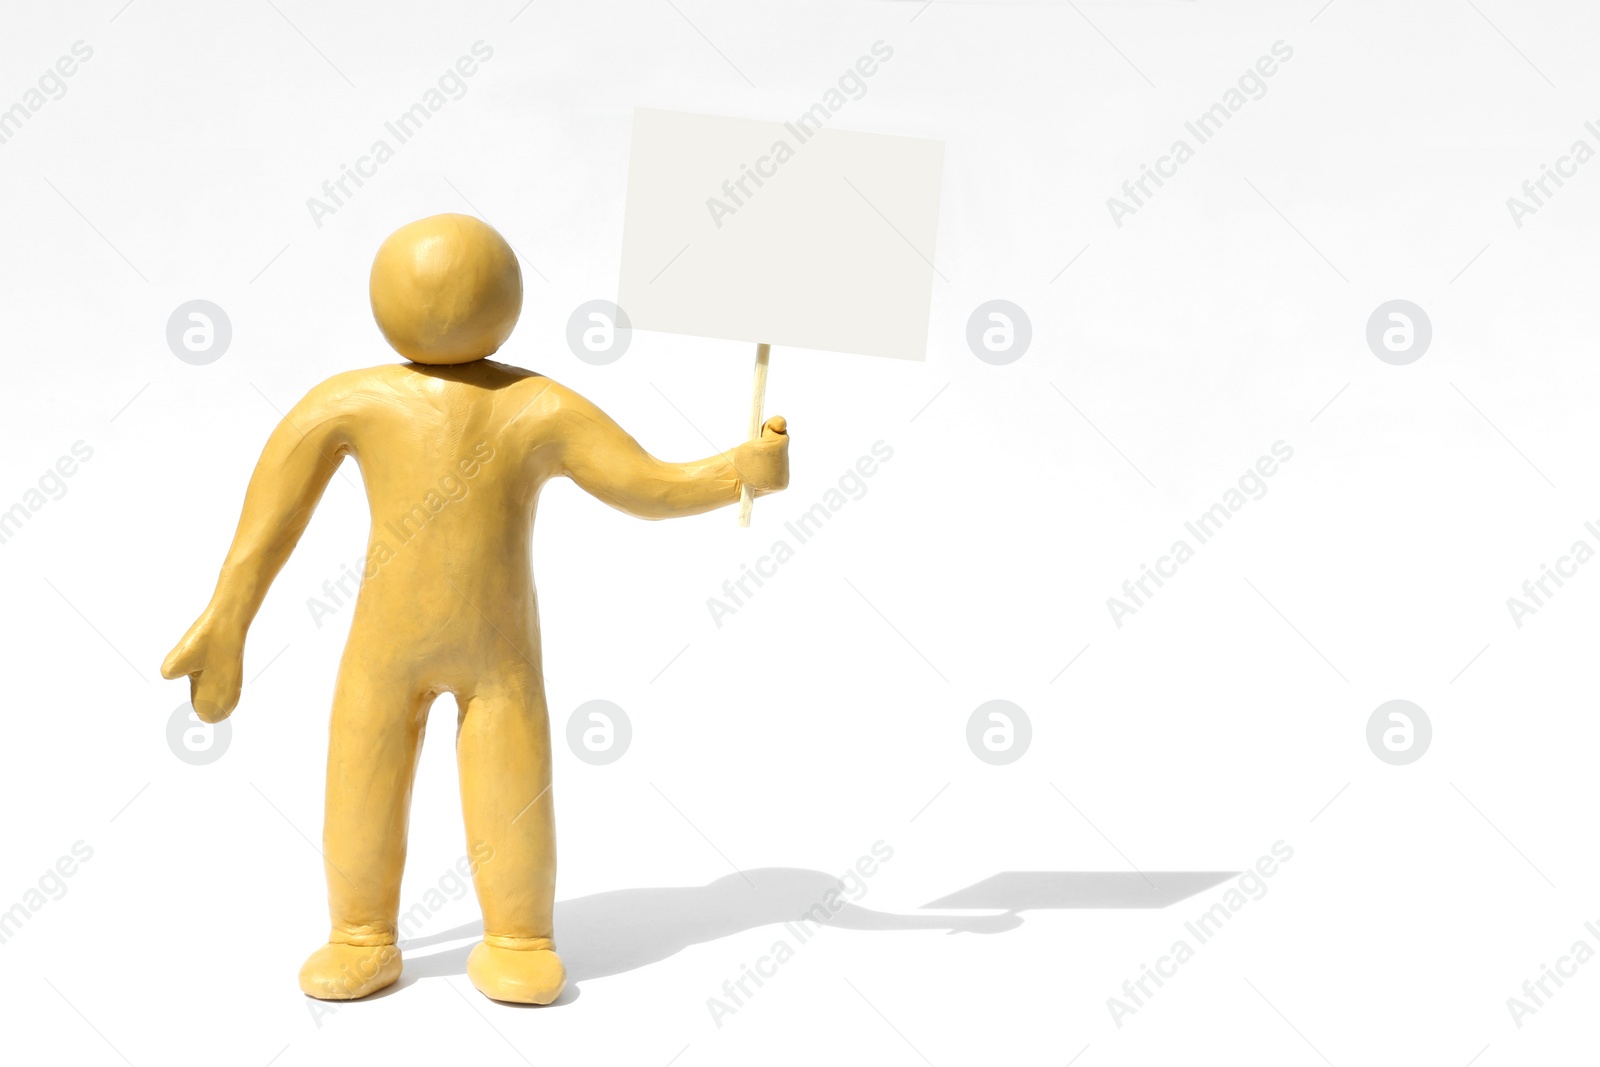 Photo of Human figure made of yellow plasticine holding blank sign on white background. Space for text